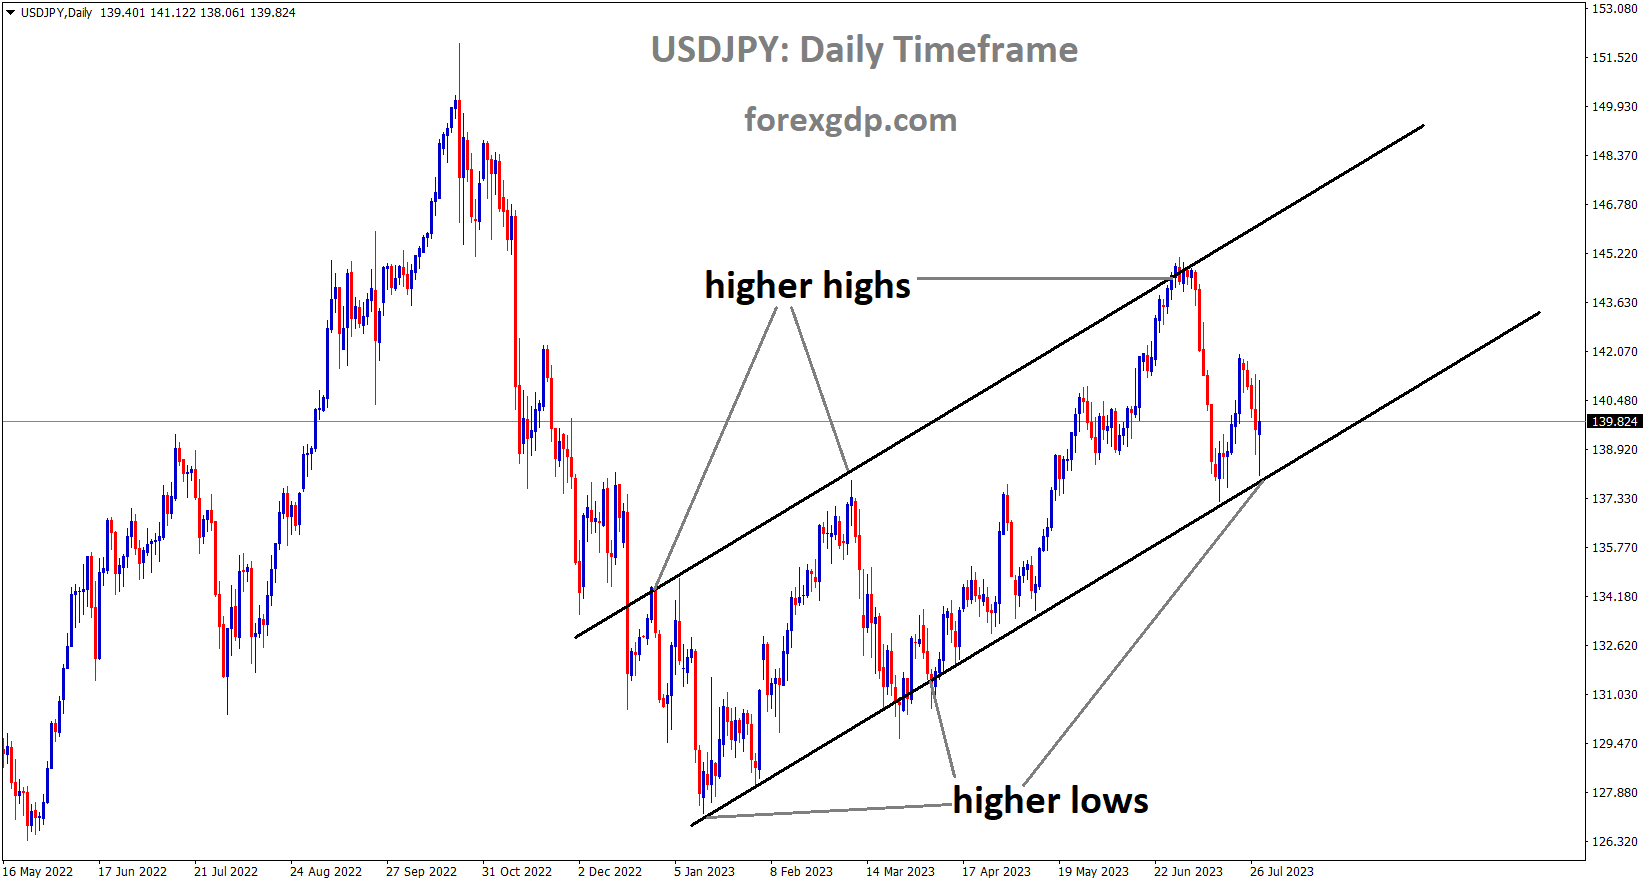 USDJPY is moving in an Ascending channel and the market has reached the higher low area of the channel 3